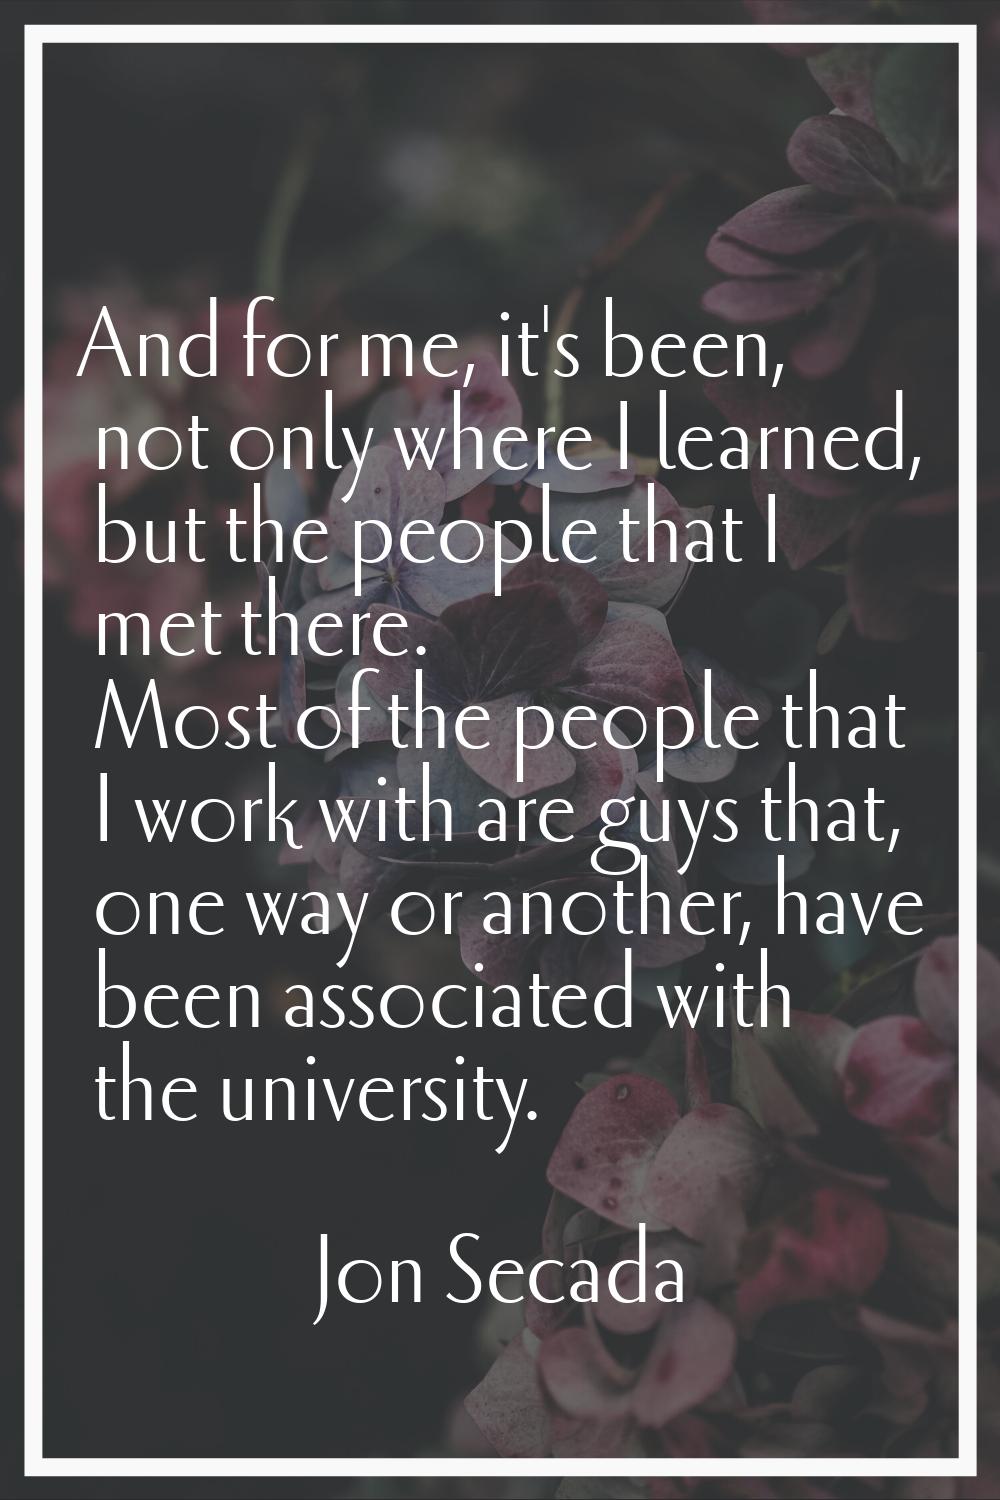 And for me, it's been, not only where I learned, but the people that I met there. Most of the peopl